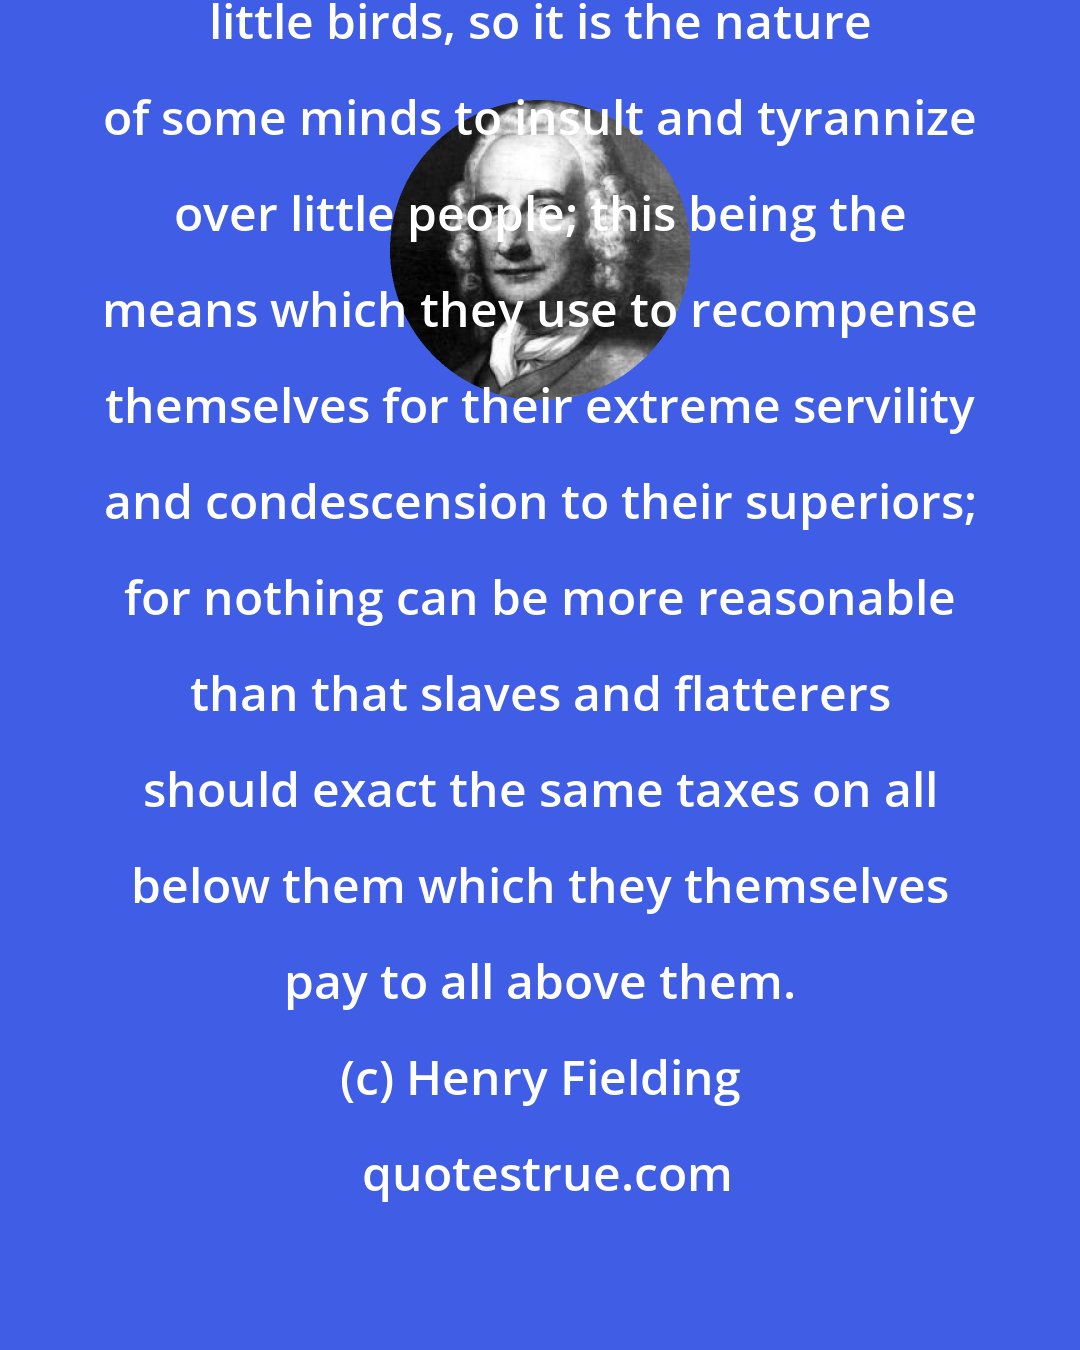 Henry Fielding: As it is the nature of a kite to devour little birds, so it is the nature of some minds to insult and tyrannize over little people; this being the means which they use to recompense themselves for their extreme servility and condescension to their superiors; for nothing can be more reasonable than that slaves and flatterers should exact the same taxes on all below them which they themselves pay to all above them.